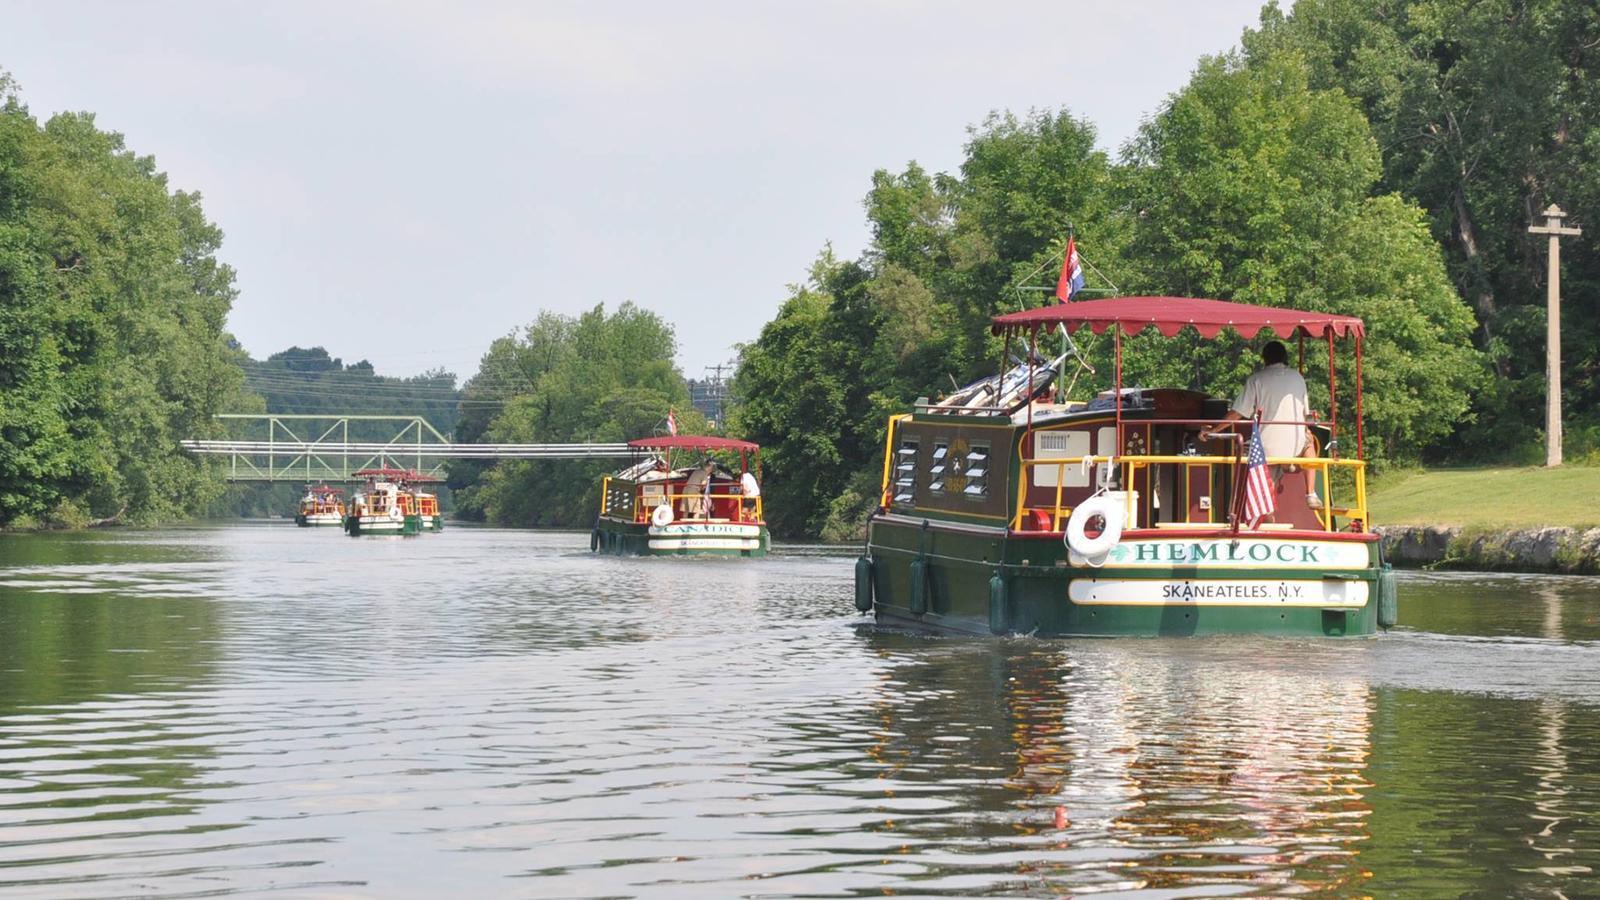 Explore the Erie Canal at Your Own Pace